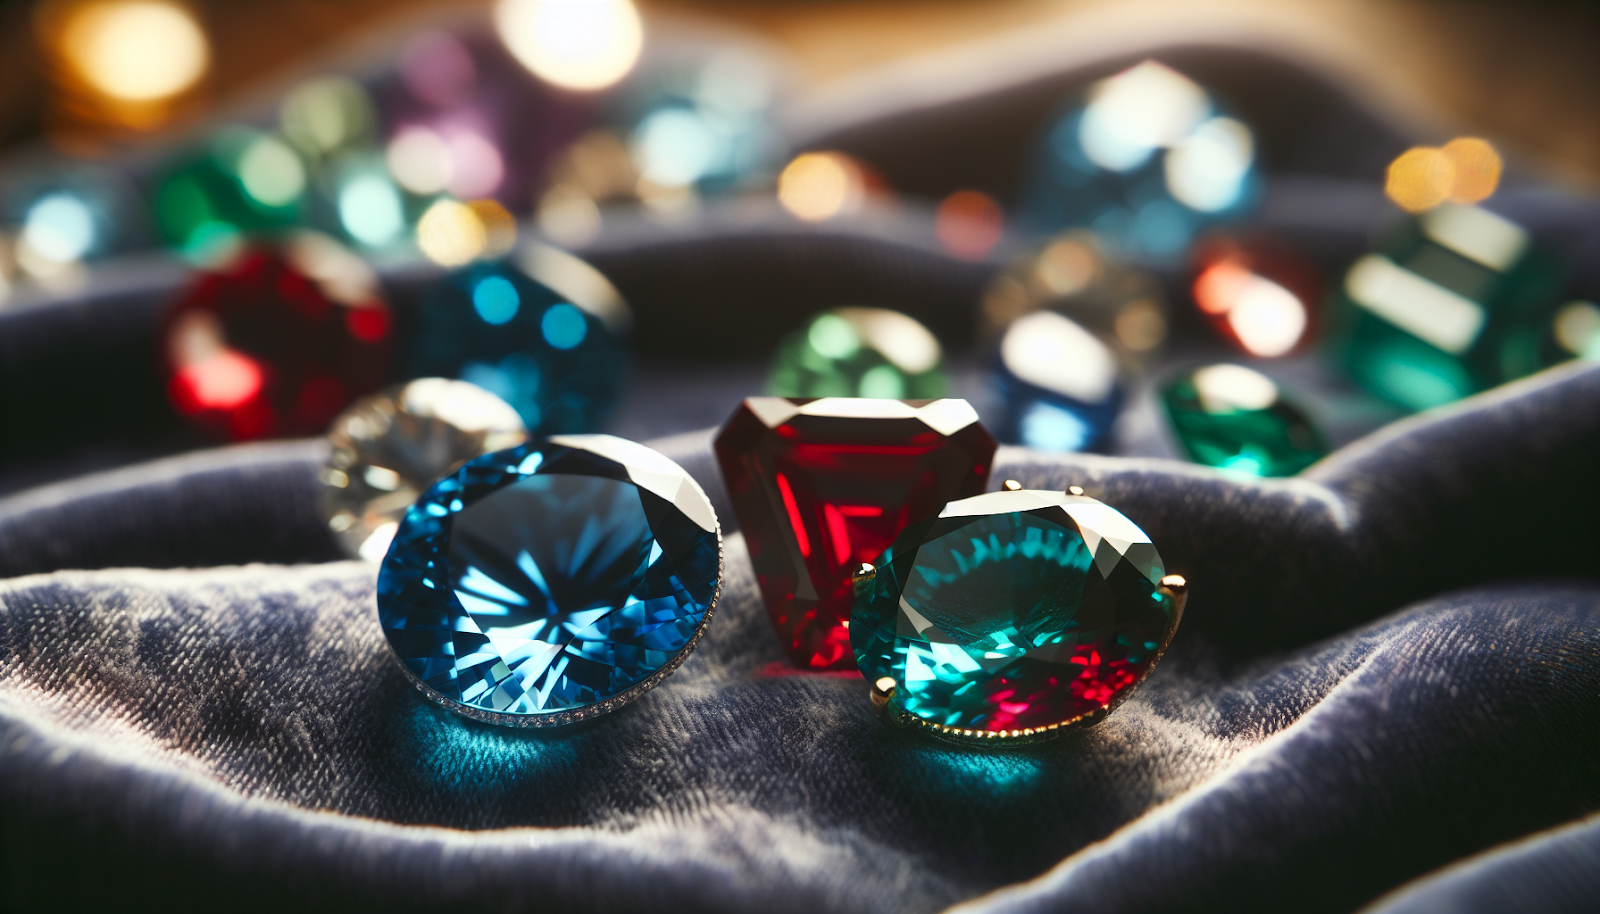 Various gemstones including sapphire, emerald, and ruby